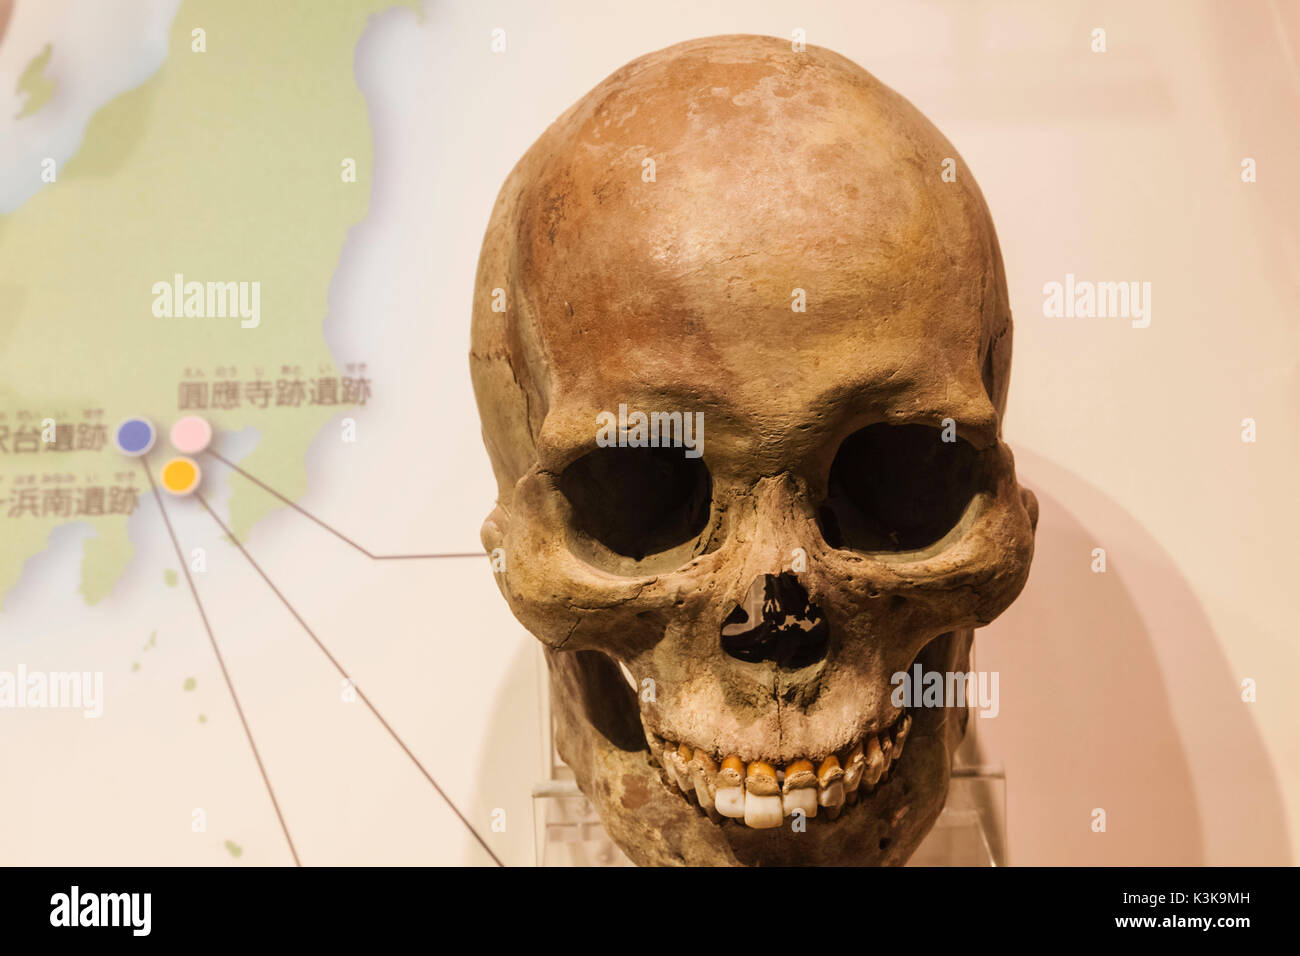 Japan, Hoshu, Tokyo, Ueno Park, National Museum of Nature and Science, Exhibit of Japanese Skull Types Stock Photo